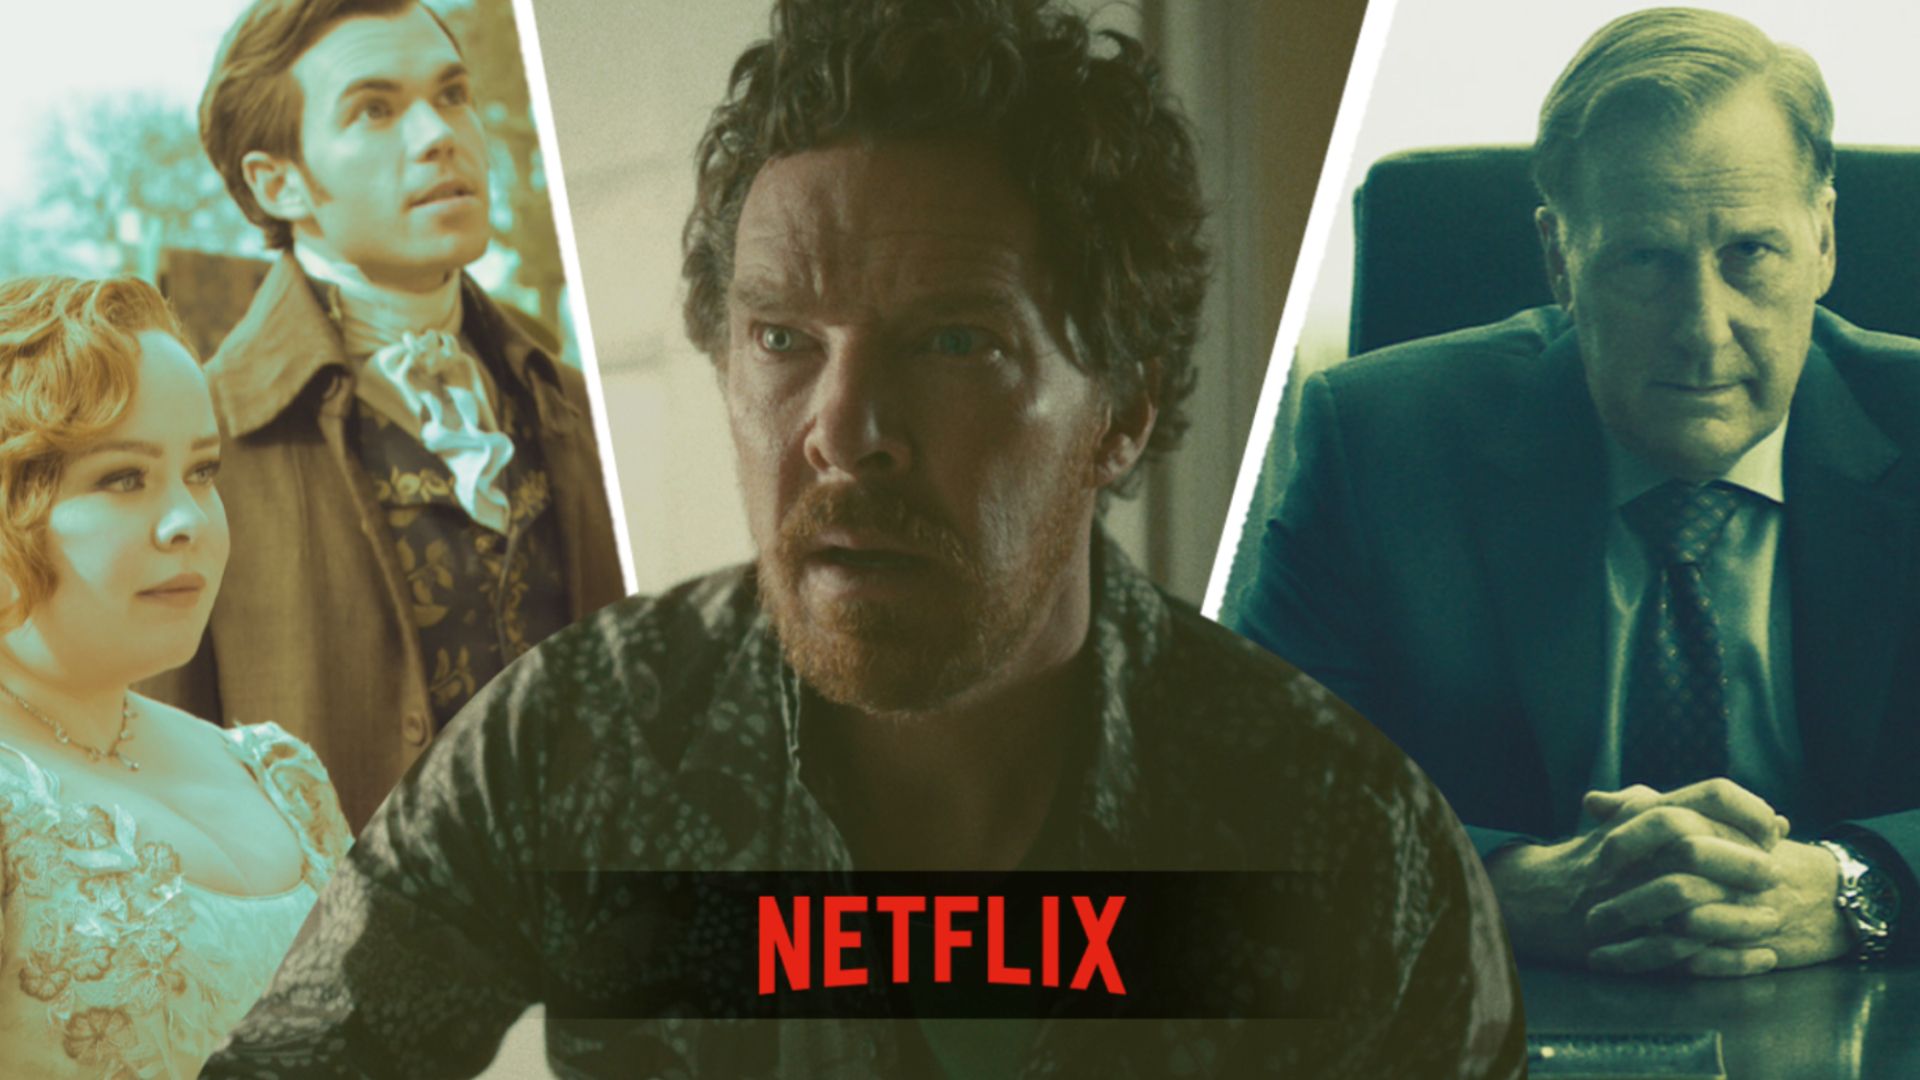 An edited image of three TV shows with the Netflix logo including A Man in Full, Bridgerton, and Eric 